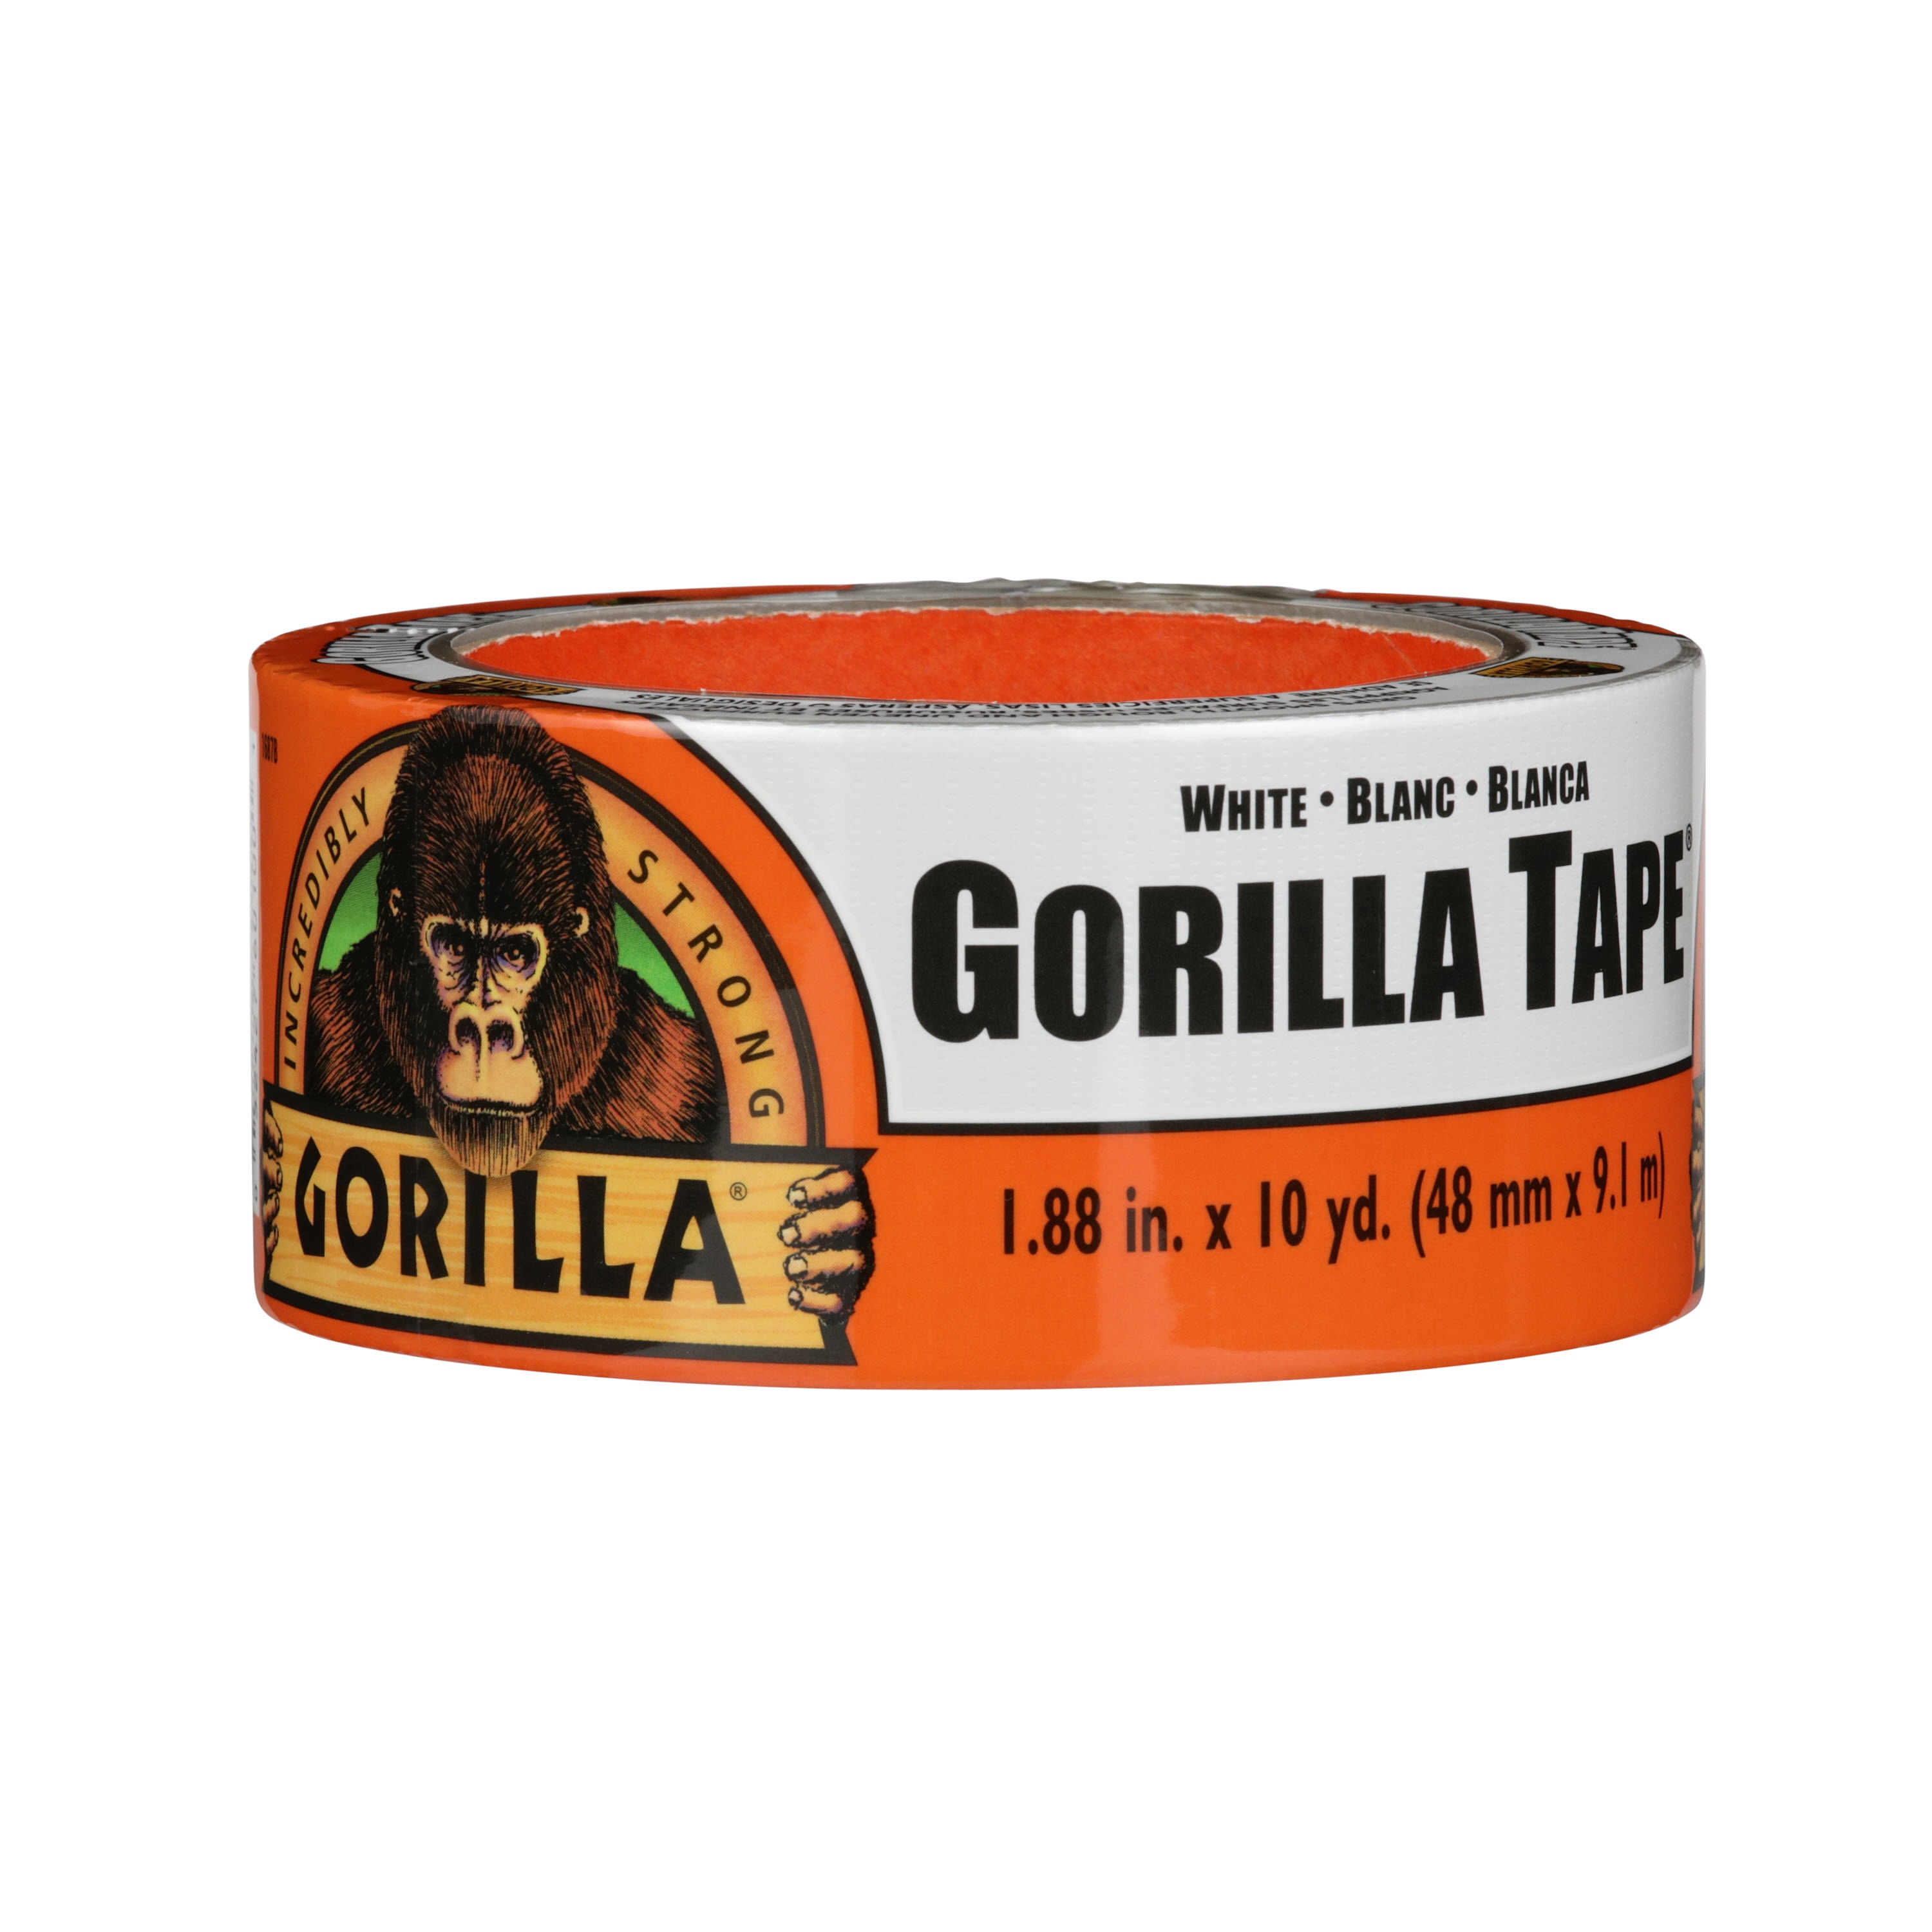 Gorilla Tough and Wide White Duct Tape 2.88-in x 25 Yard(s) in the